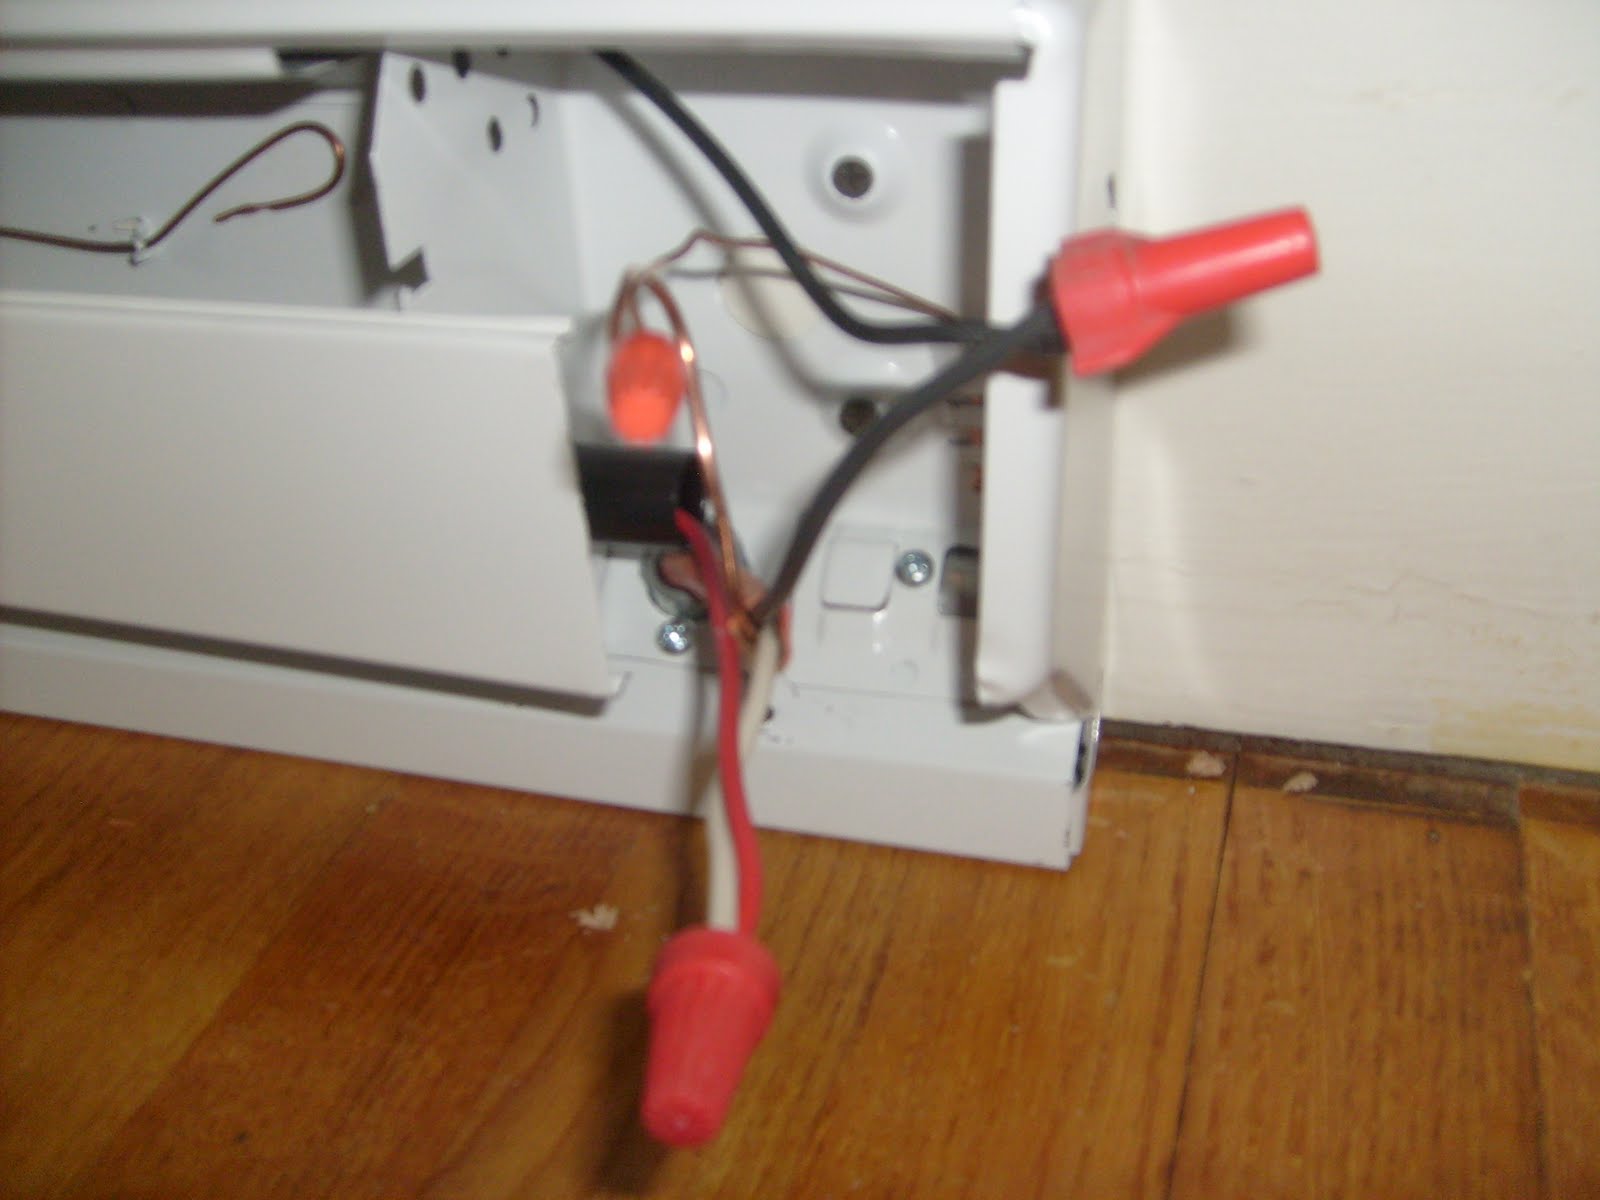 thermostat wiring for baseboard heater Wiring thermostat heater honeywell diagram baseboard